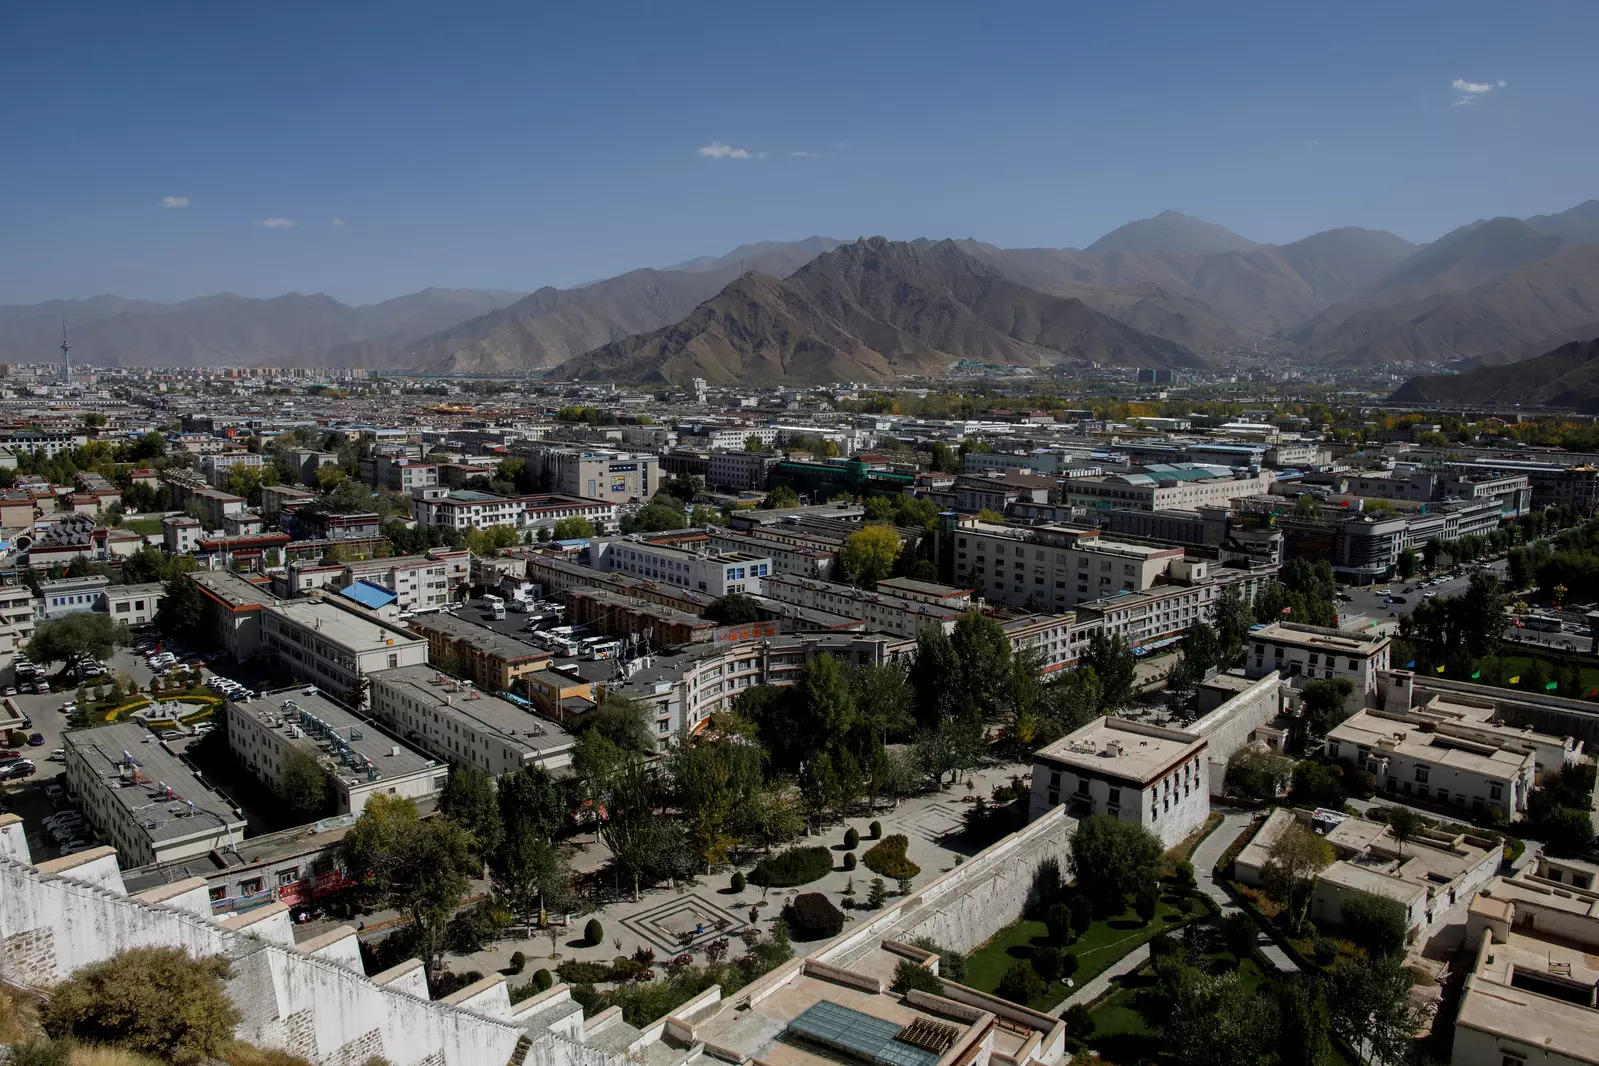 Lhasa building boom heightens divisions in Tibet